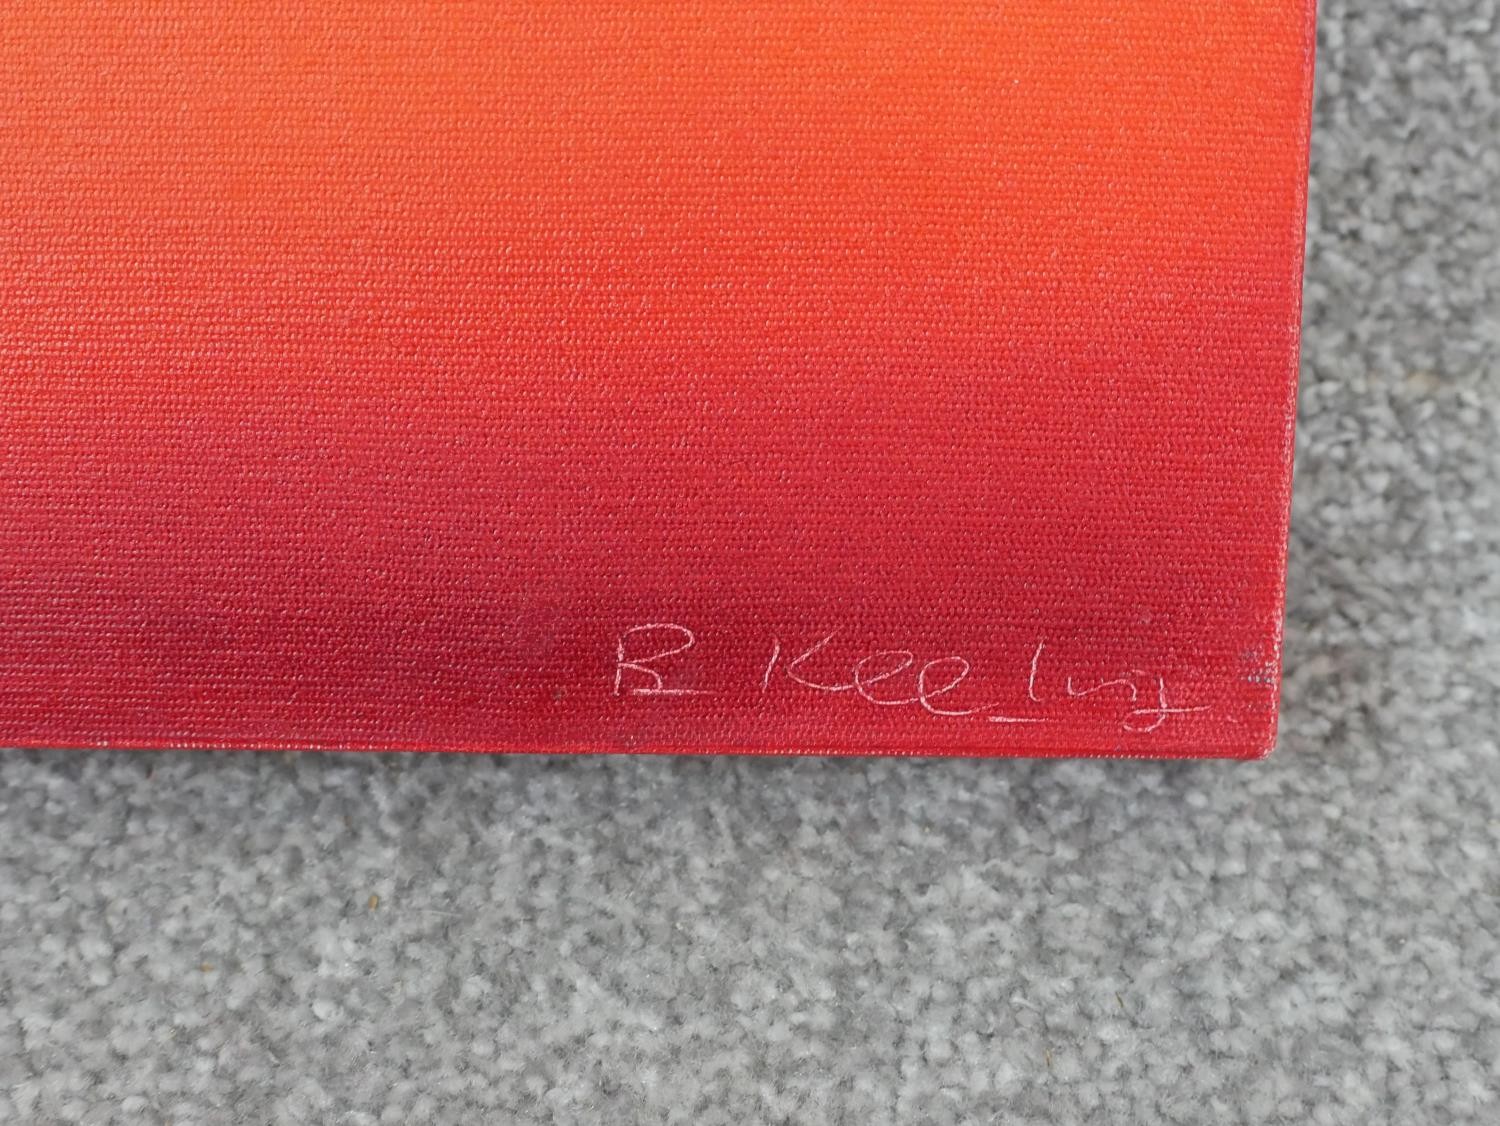 B Keeling (Contemporary), three sunsets, acrylic on box canvas, signed. H.51 W.51cm - Image 4 of 8